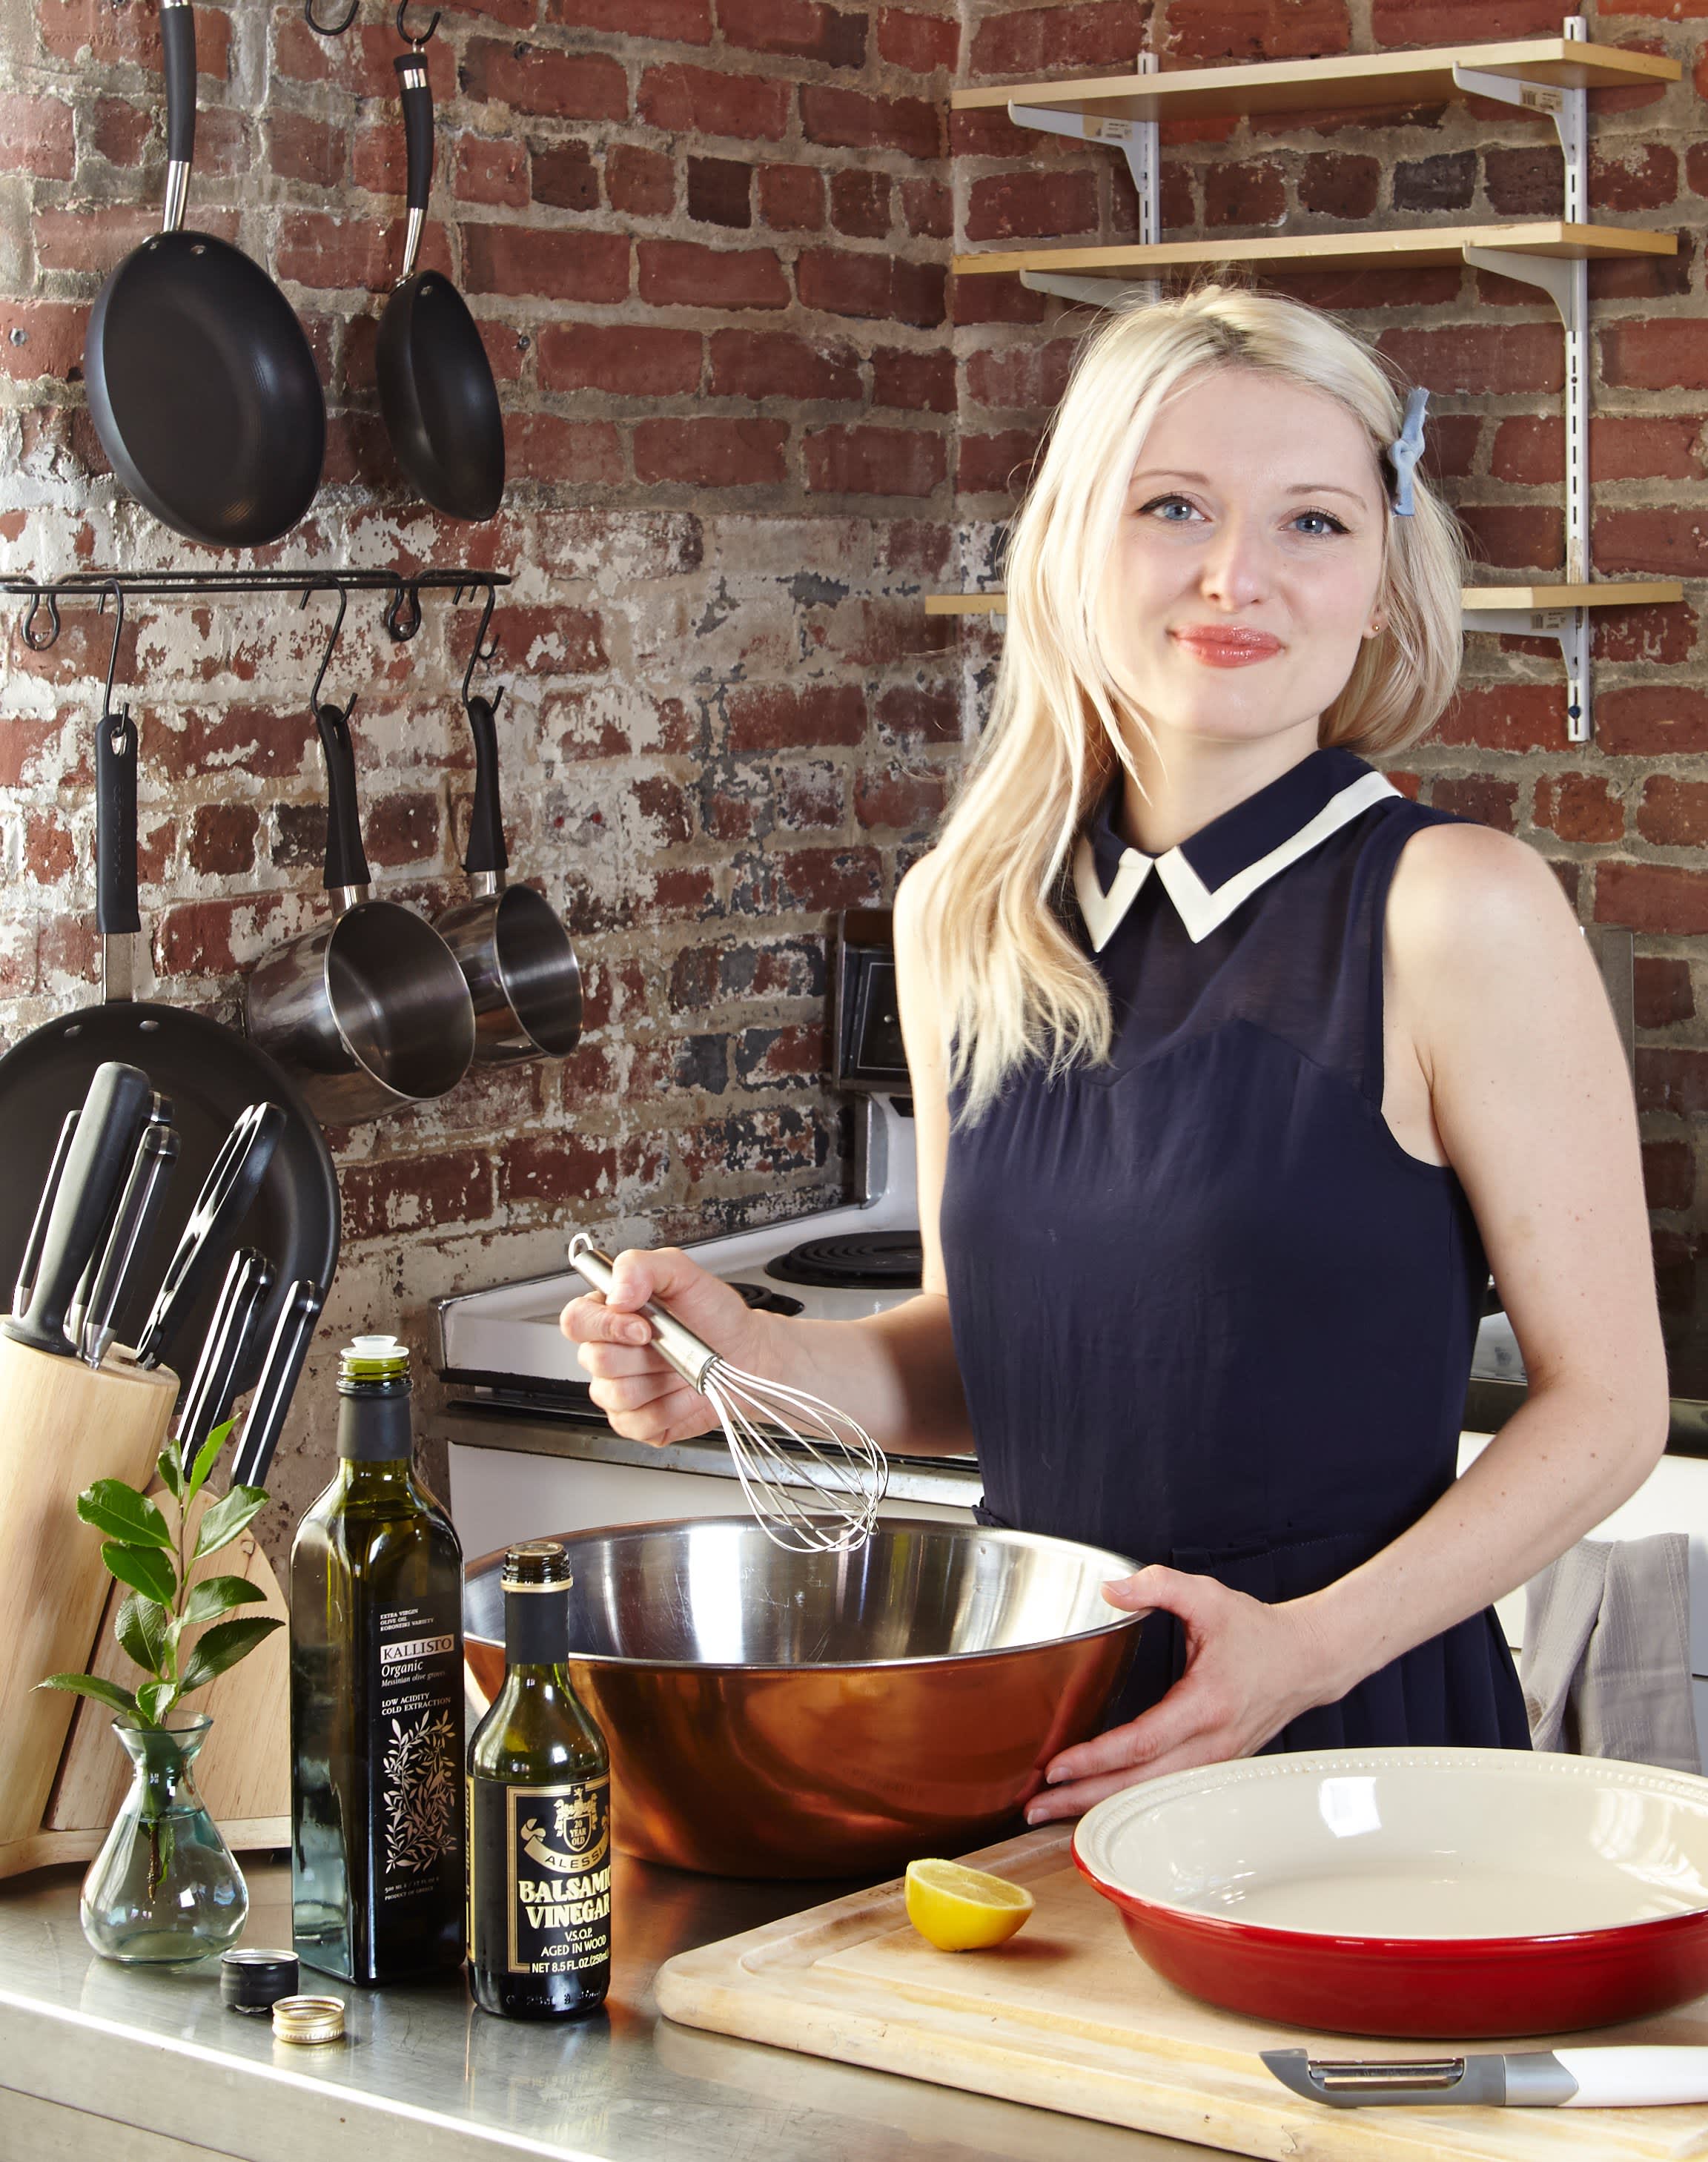 Faith Blakeney's Tip For Buying Vintage Enamel Pots and Pans